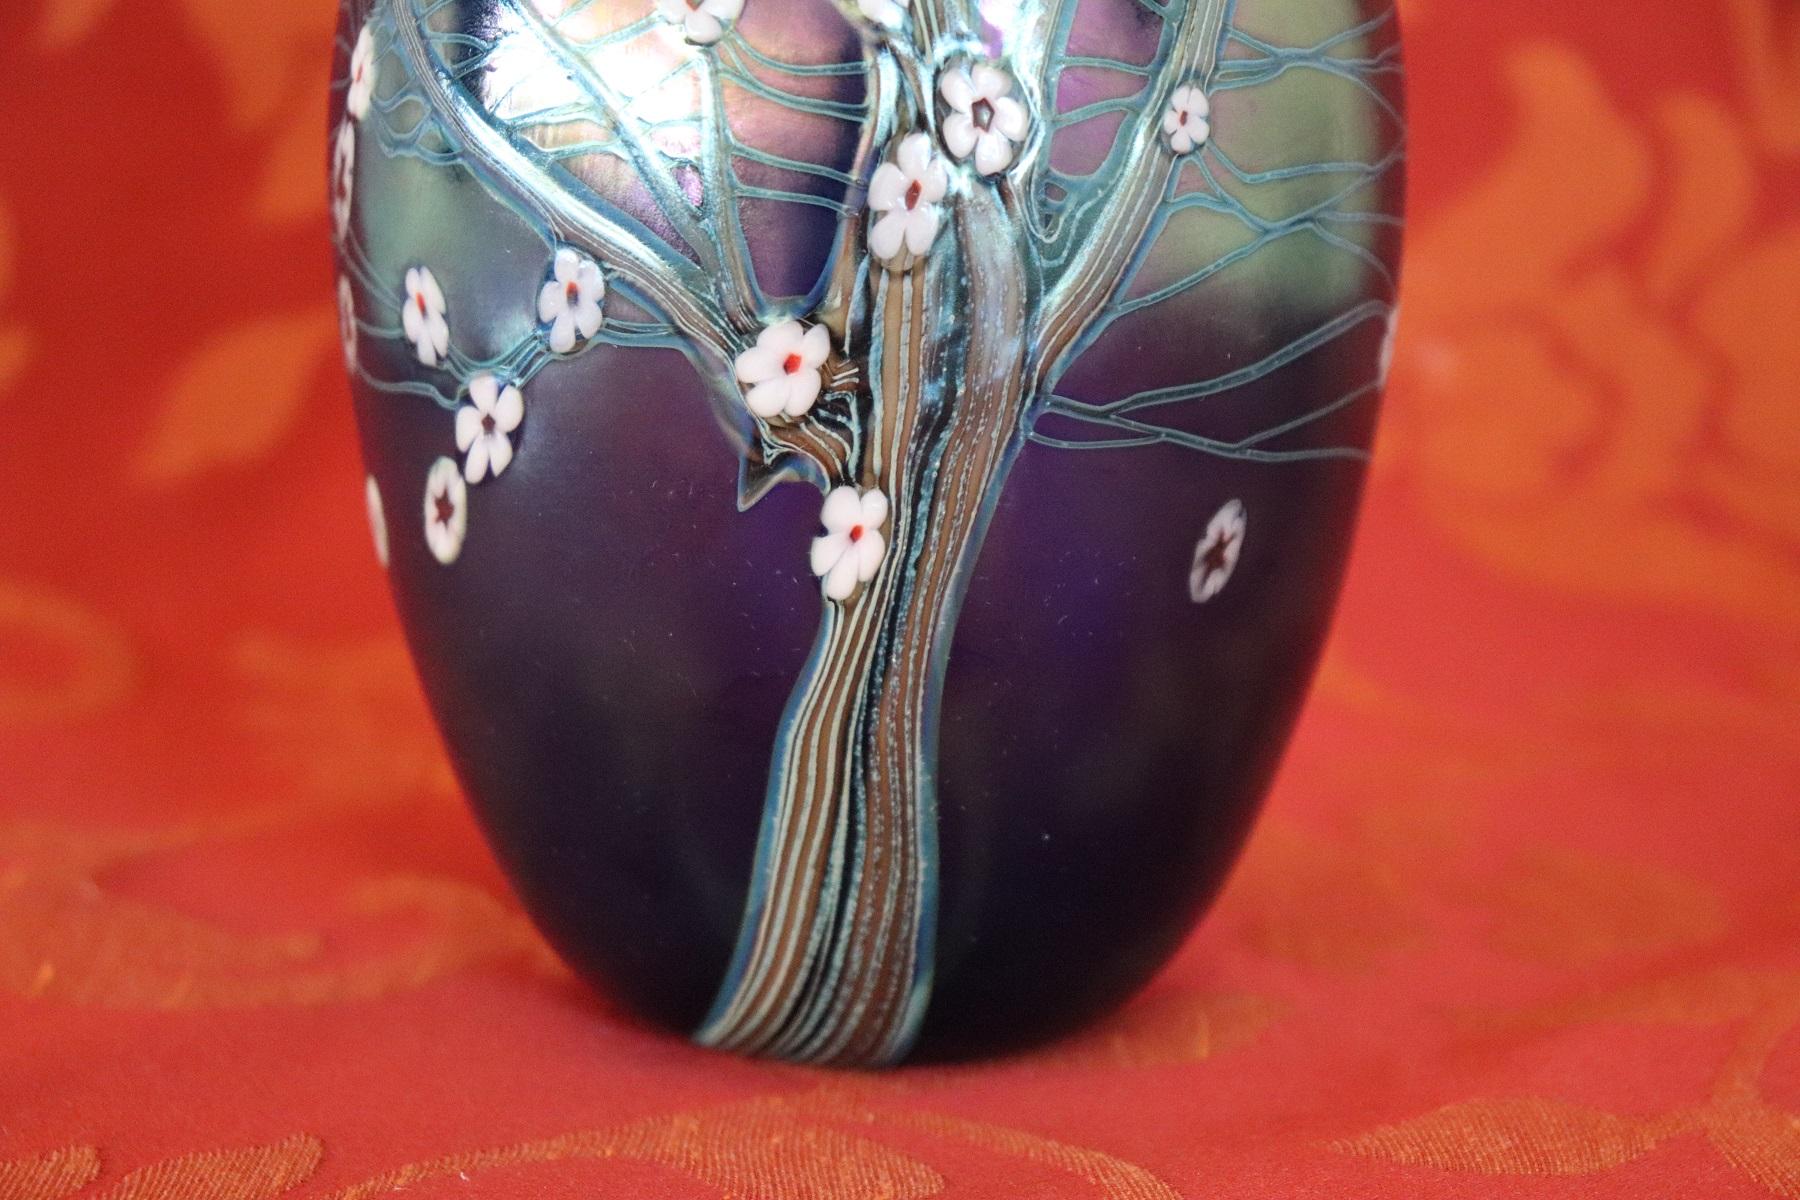 Early 20th Century 20th Century Germany Art Nouveau Vase in Glass with Enamel Decoration by Orivit